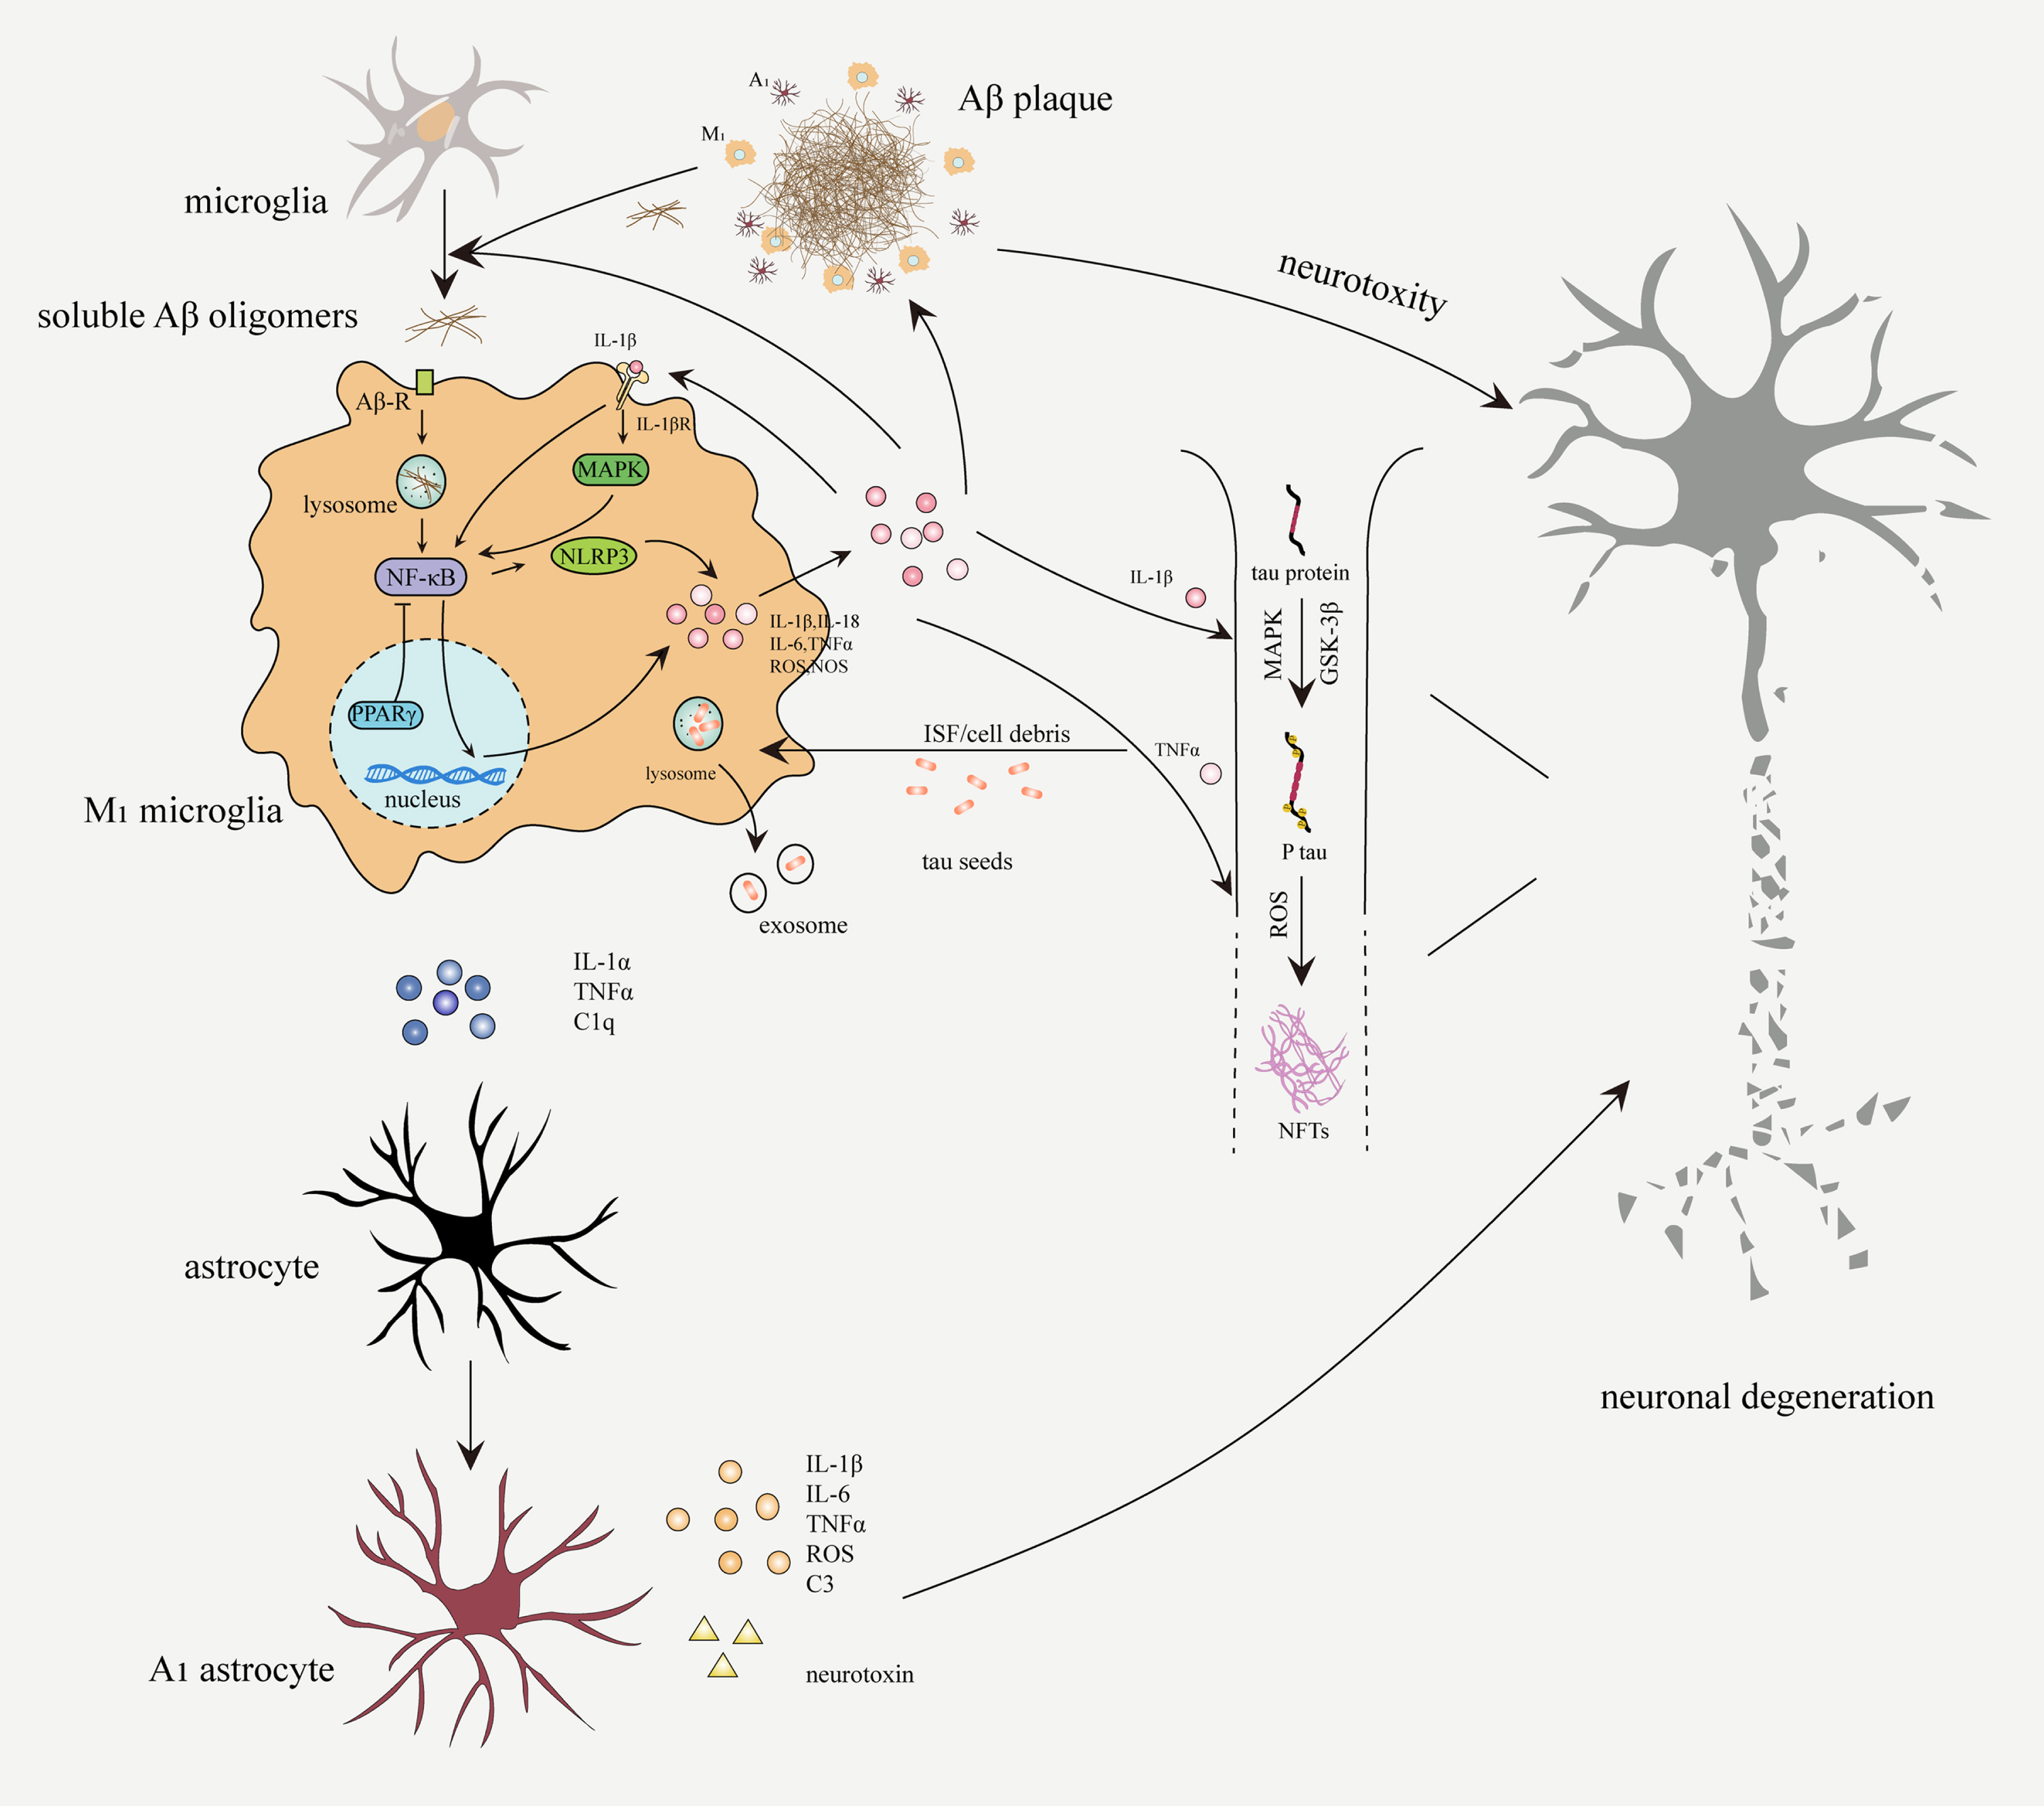 Neuroinflammation in the pathogenesis of AD. Soluble Aβ oligomers bind to Aβ receptors (Aβ-R) on microglia, which will be subsequently internalized and degraded. Activated microglia secrete proinflammatory factors through NF-κB signaling pathway to amplify microglial activation and phagocytosis. Aβ aggregation due to overproduction or impaired phagocytosis, continuously activates microglia and astrocytes. M1 microglia and A1 astrocytes secrete proinflammatory cytokines (IL-1β, IL-6, IL-18, and TNFα), ROS, complement C3, and neurotoxin, which can accelerate neuronal damage, expand inflammatory response, and promote Aβ deposition and NFTs formation. Activated microglia participate in the spread of pathological tau through the exosome pathway.